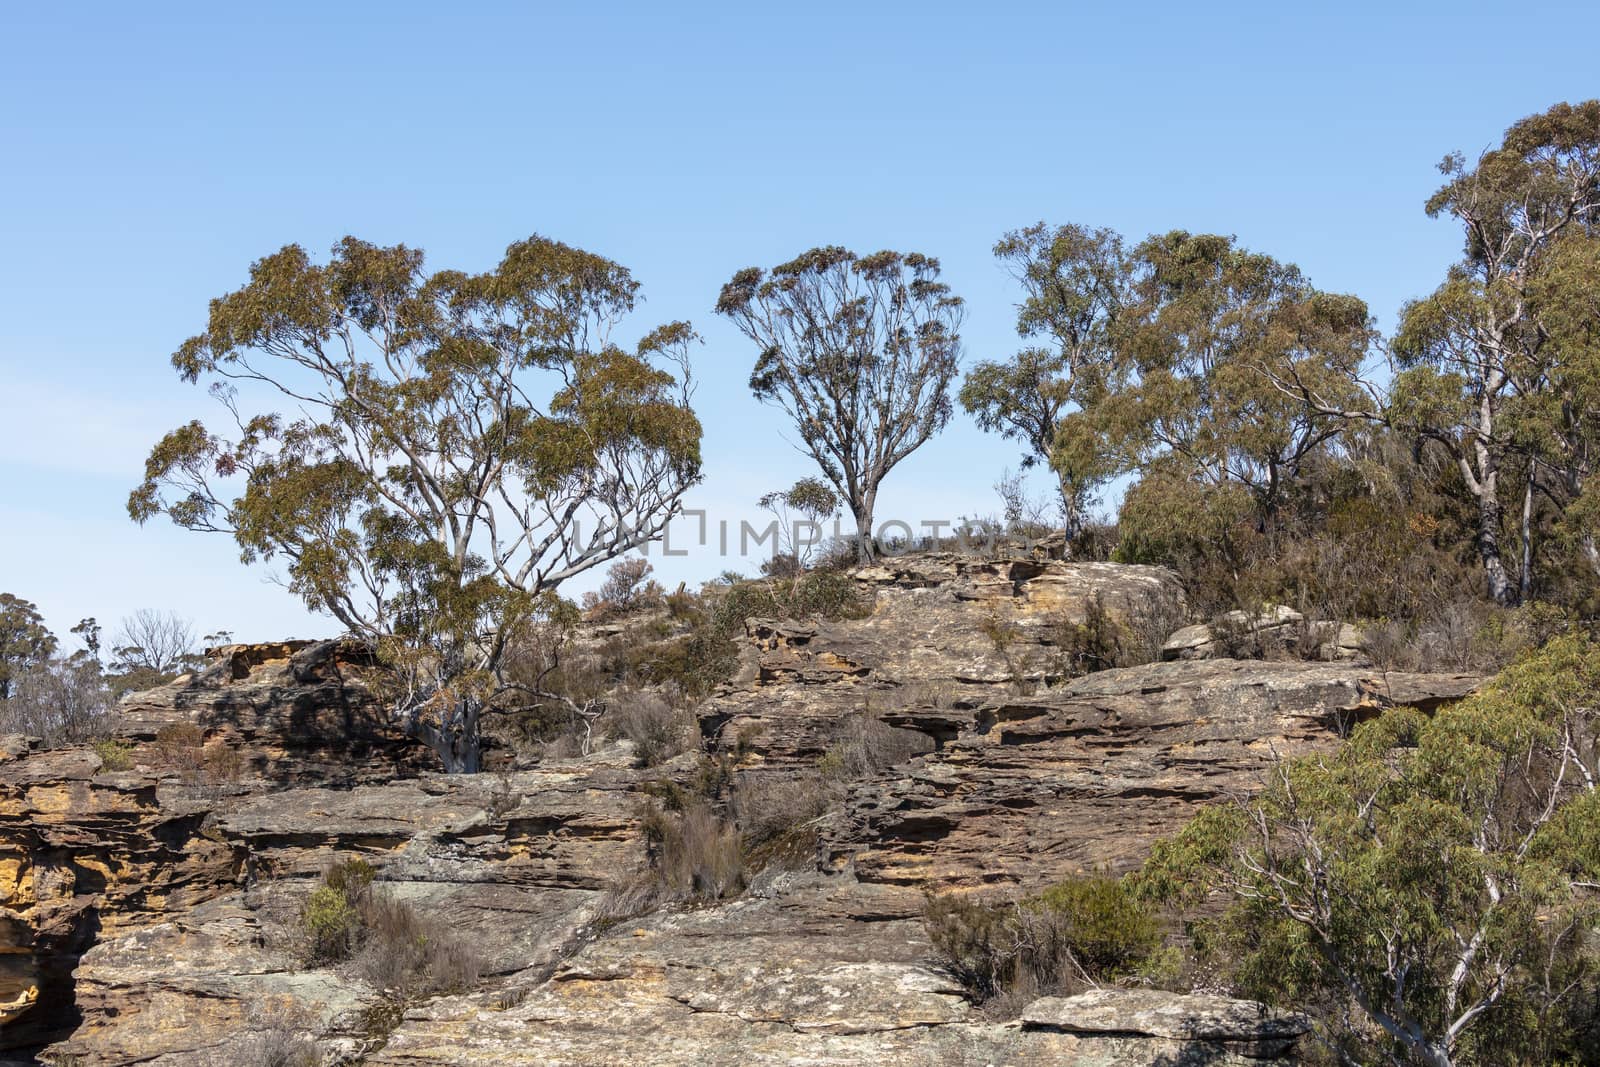 The rocks at Hassans Walls in the Central Tablelands near Lithgow in regional New South Wales in Australia